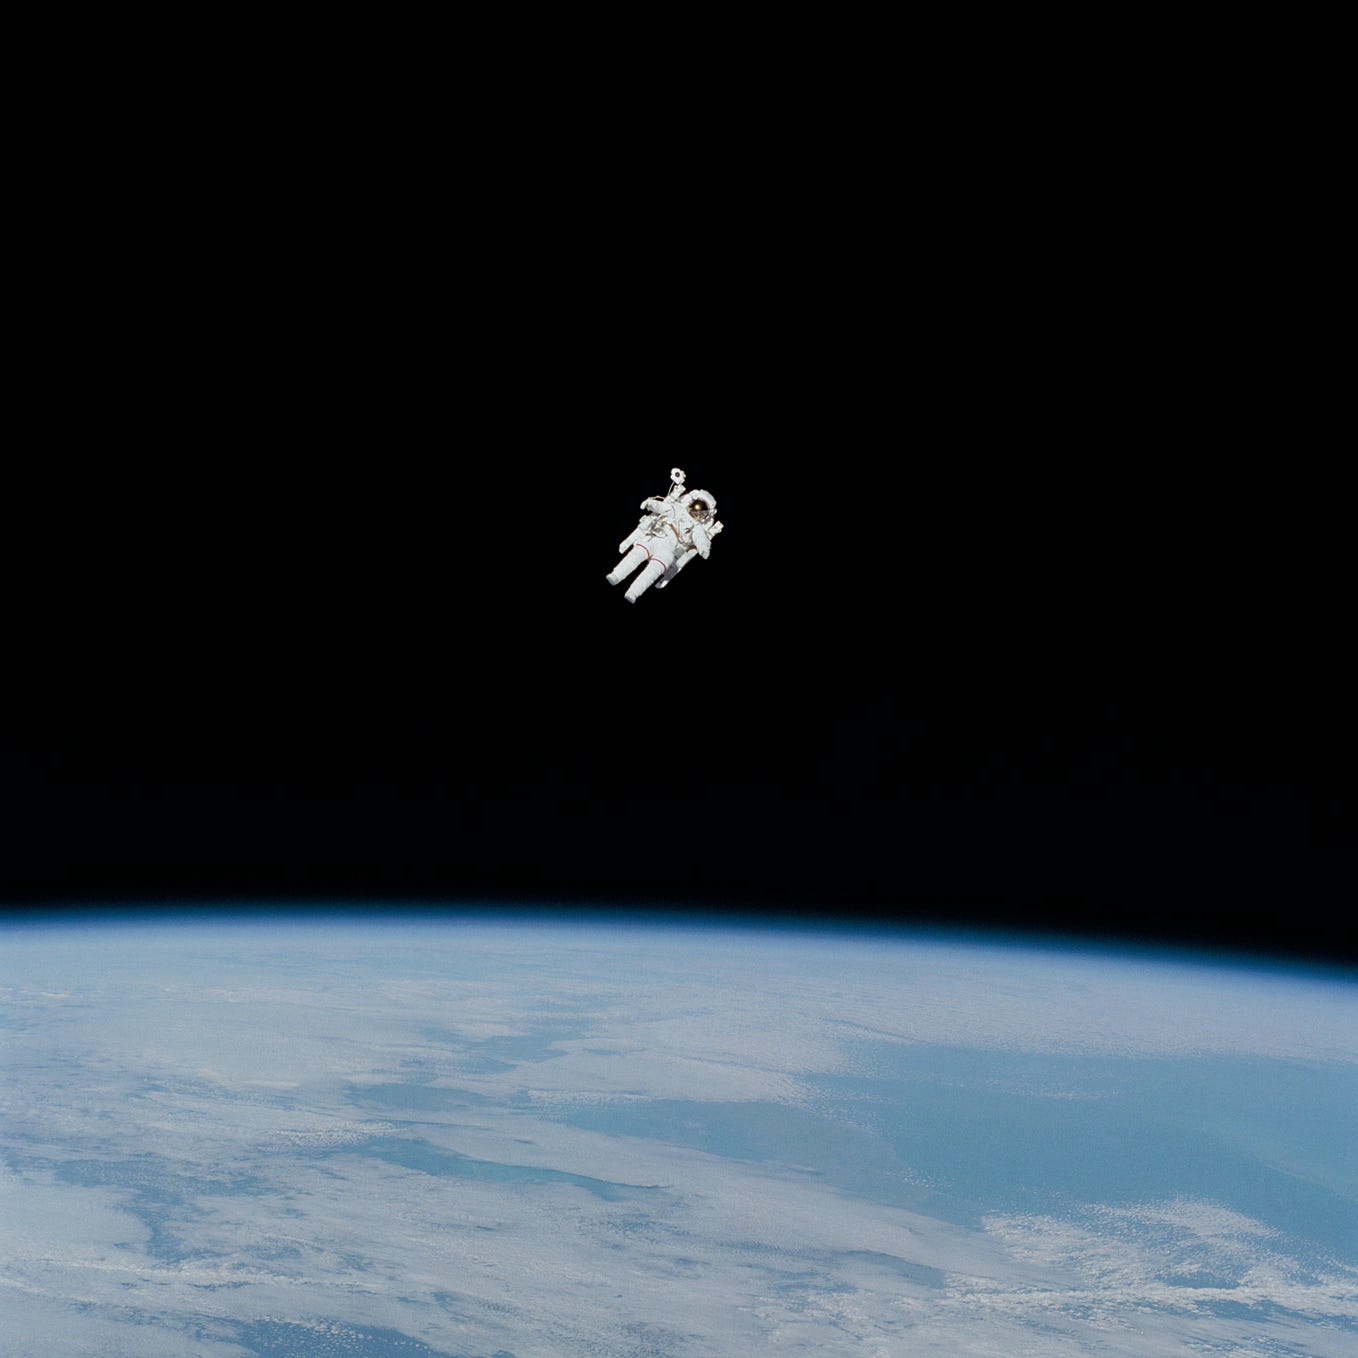 A lone astronaut in space, floating over Earth